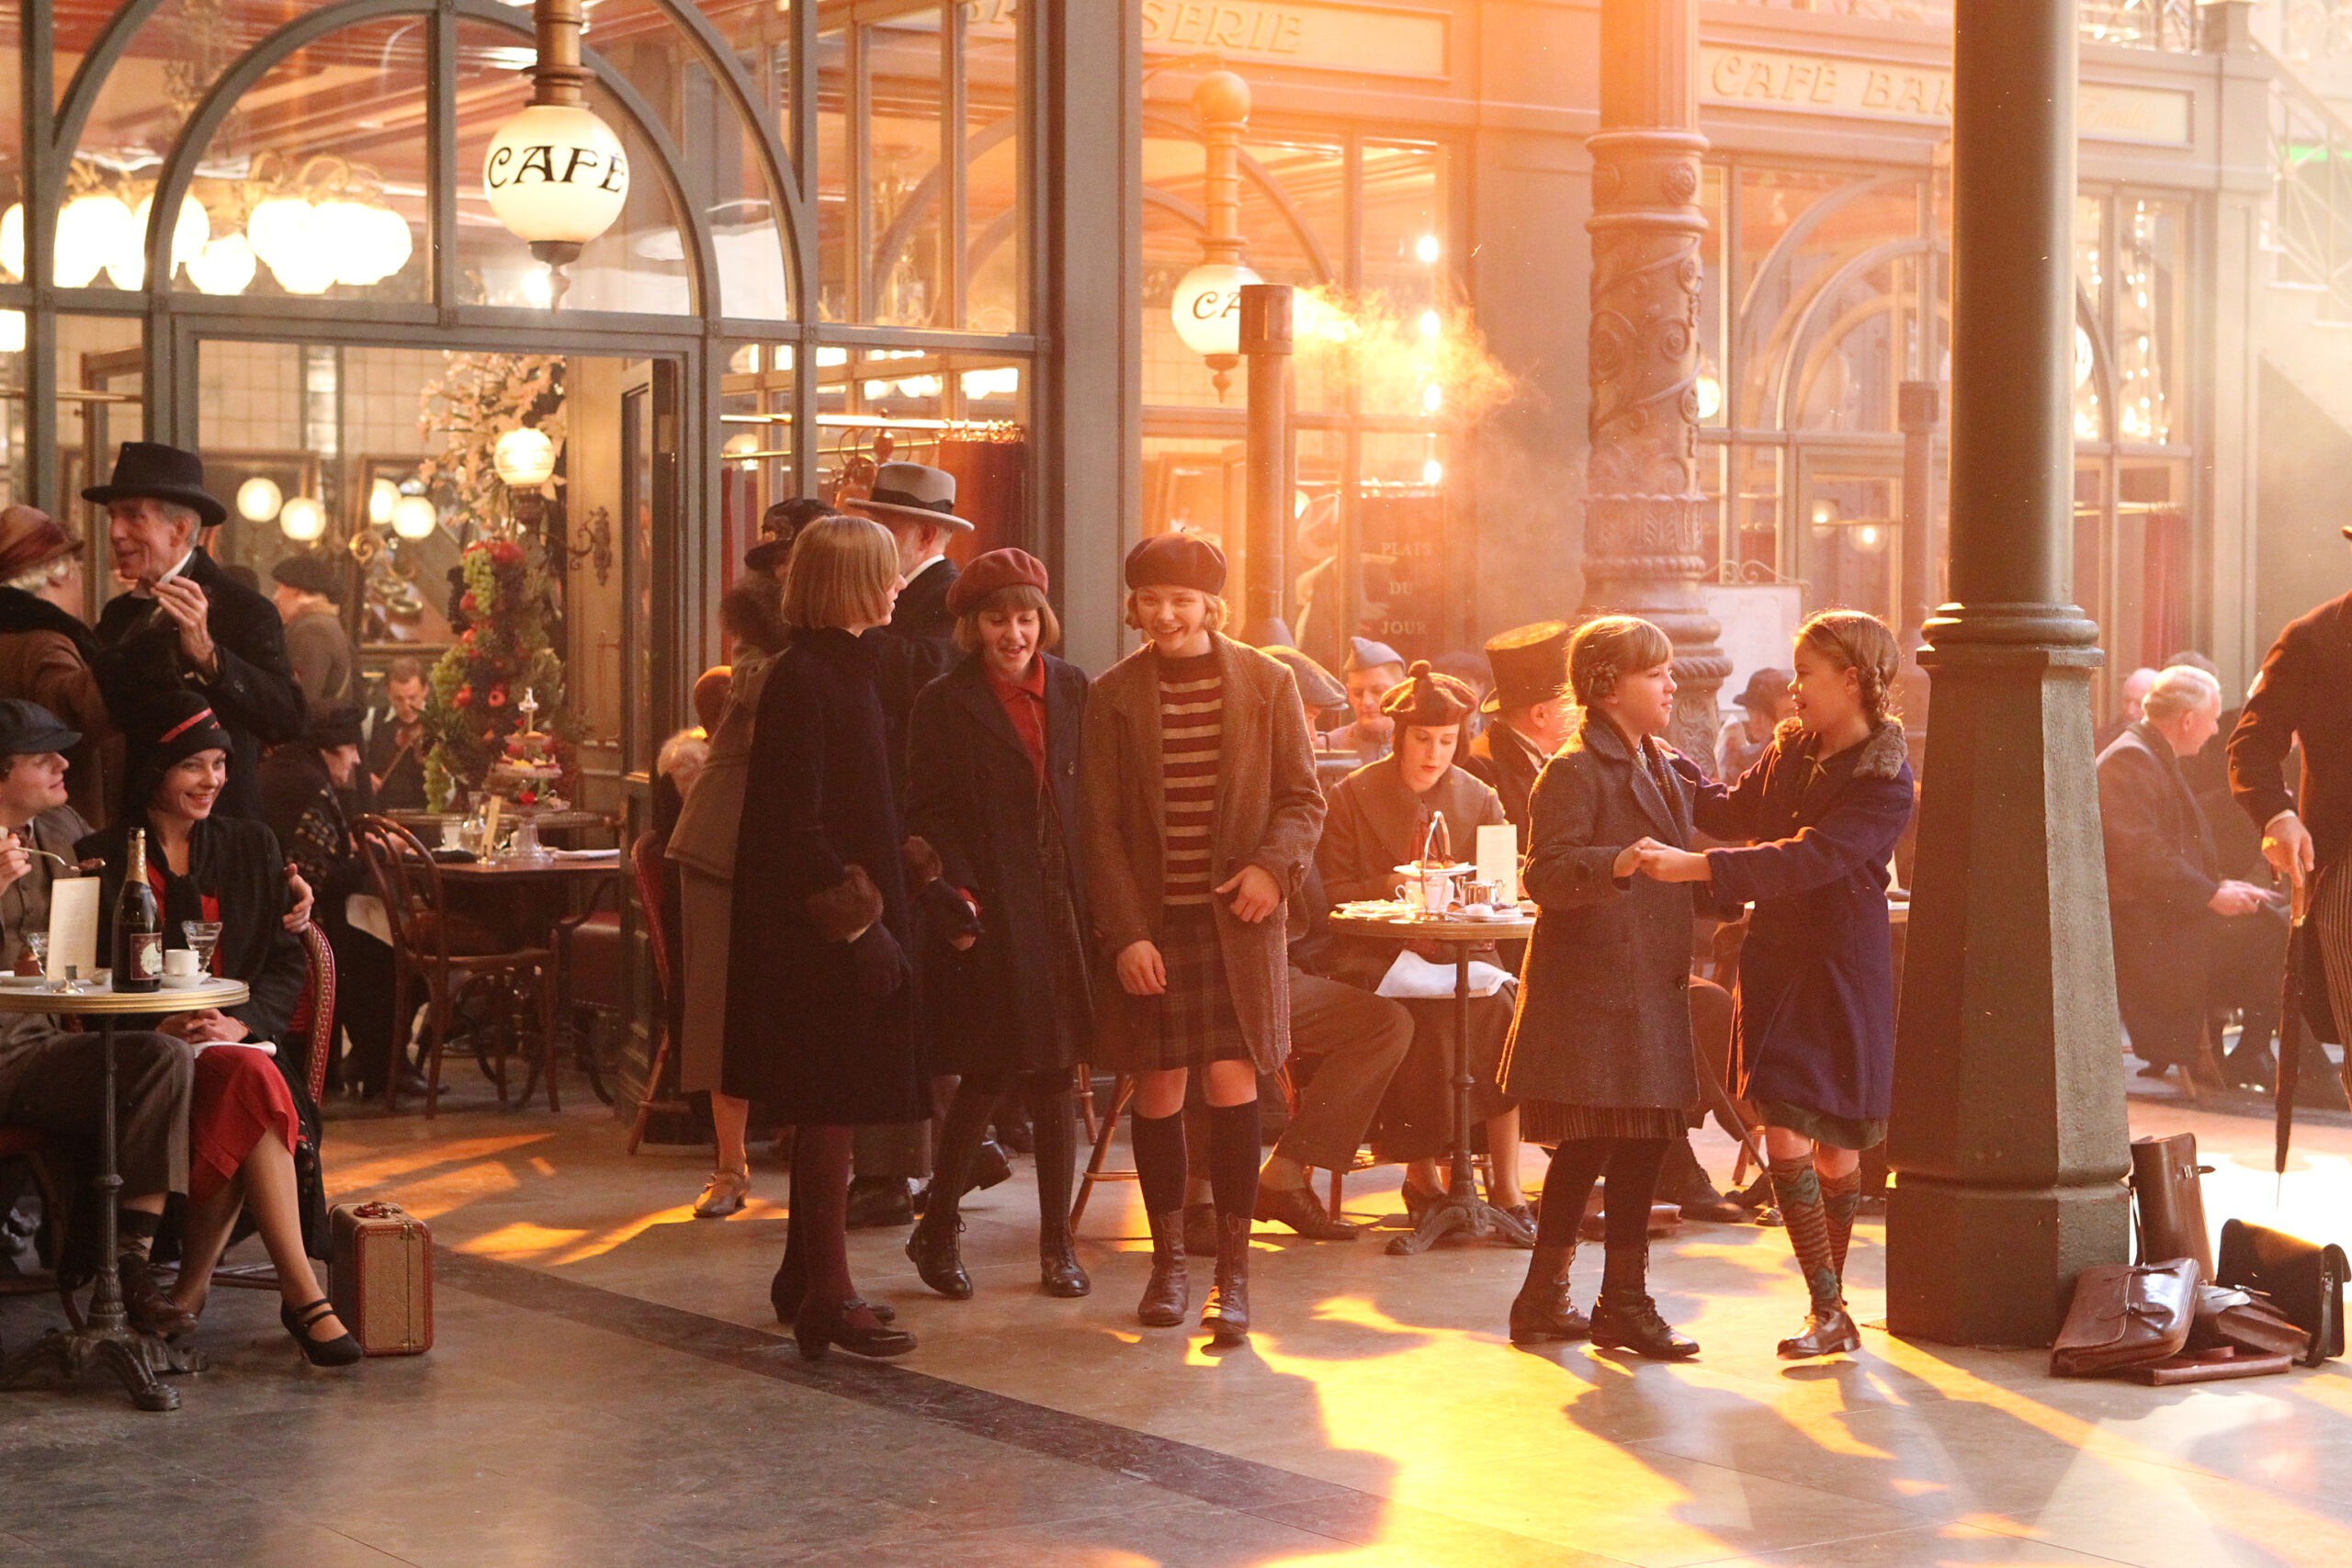 HUGO - Directed by Martin Scorsese - Int. Montparnasse Station, Stage Set - ©2011 - Sony Pictures